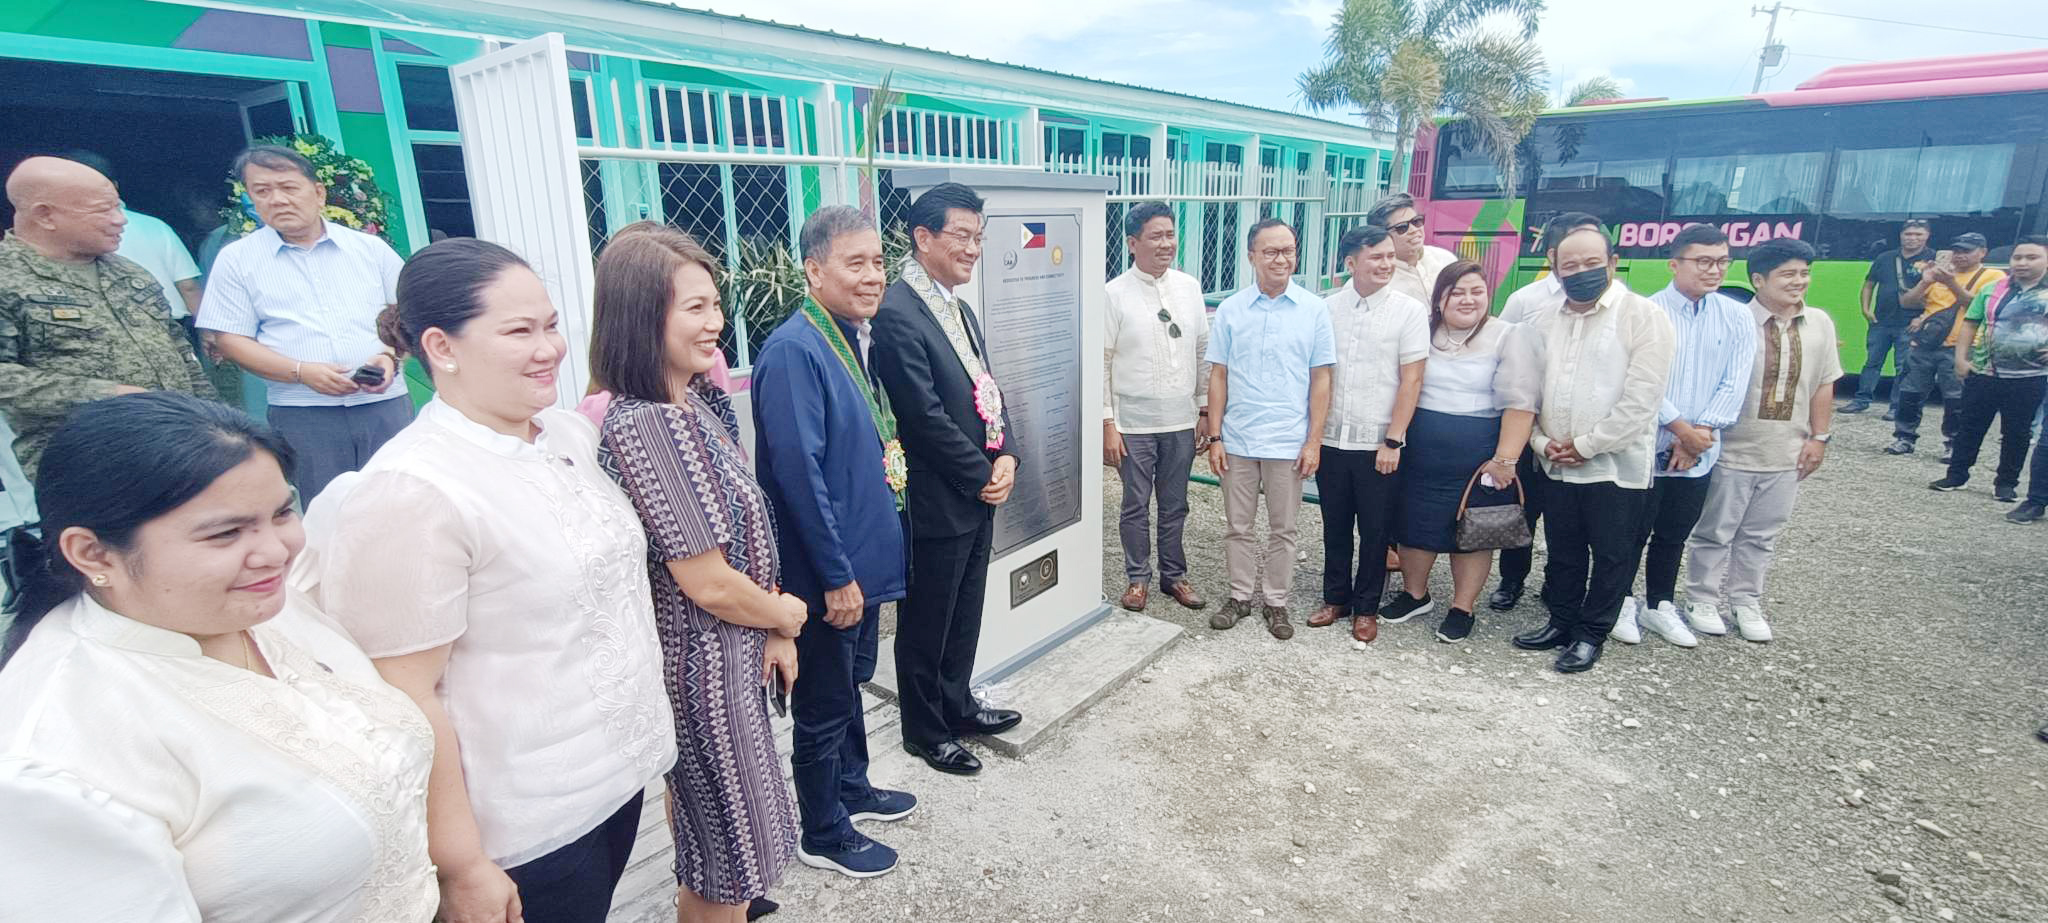 Borongan city gov't turns over a terminal building it funded to CAAP ...